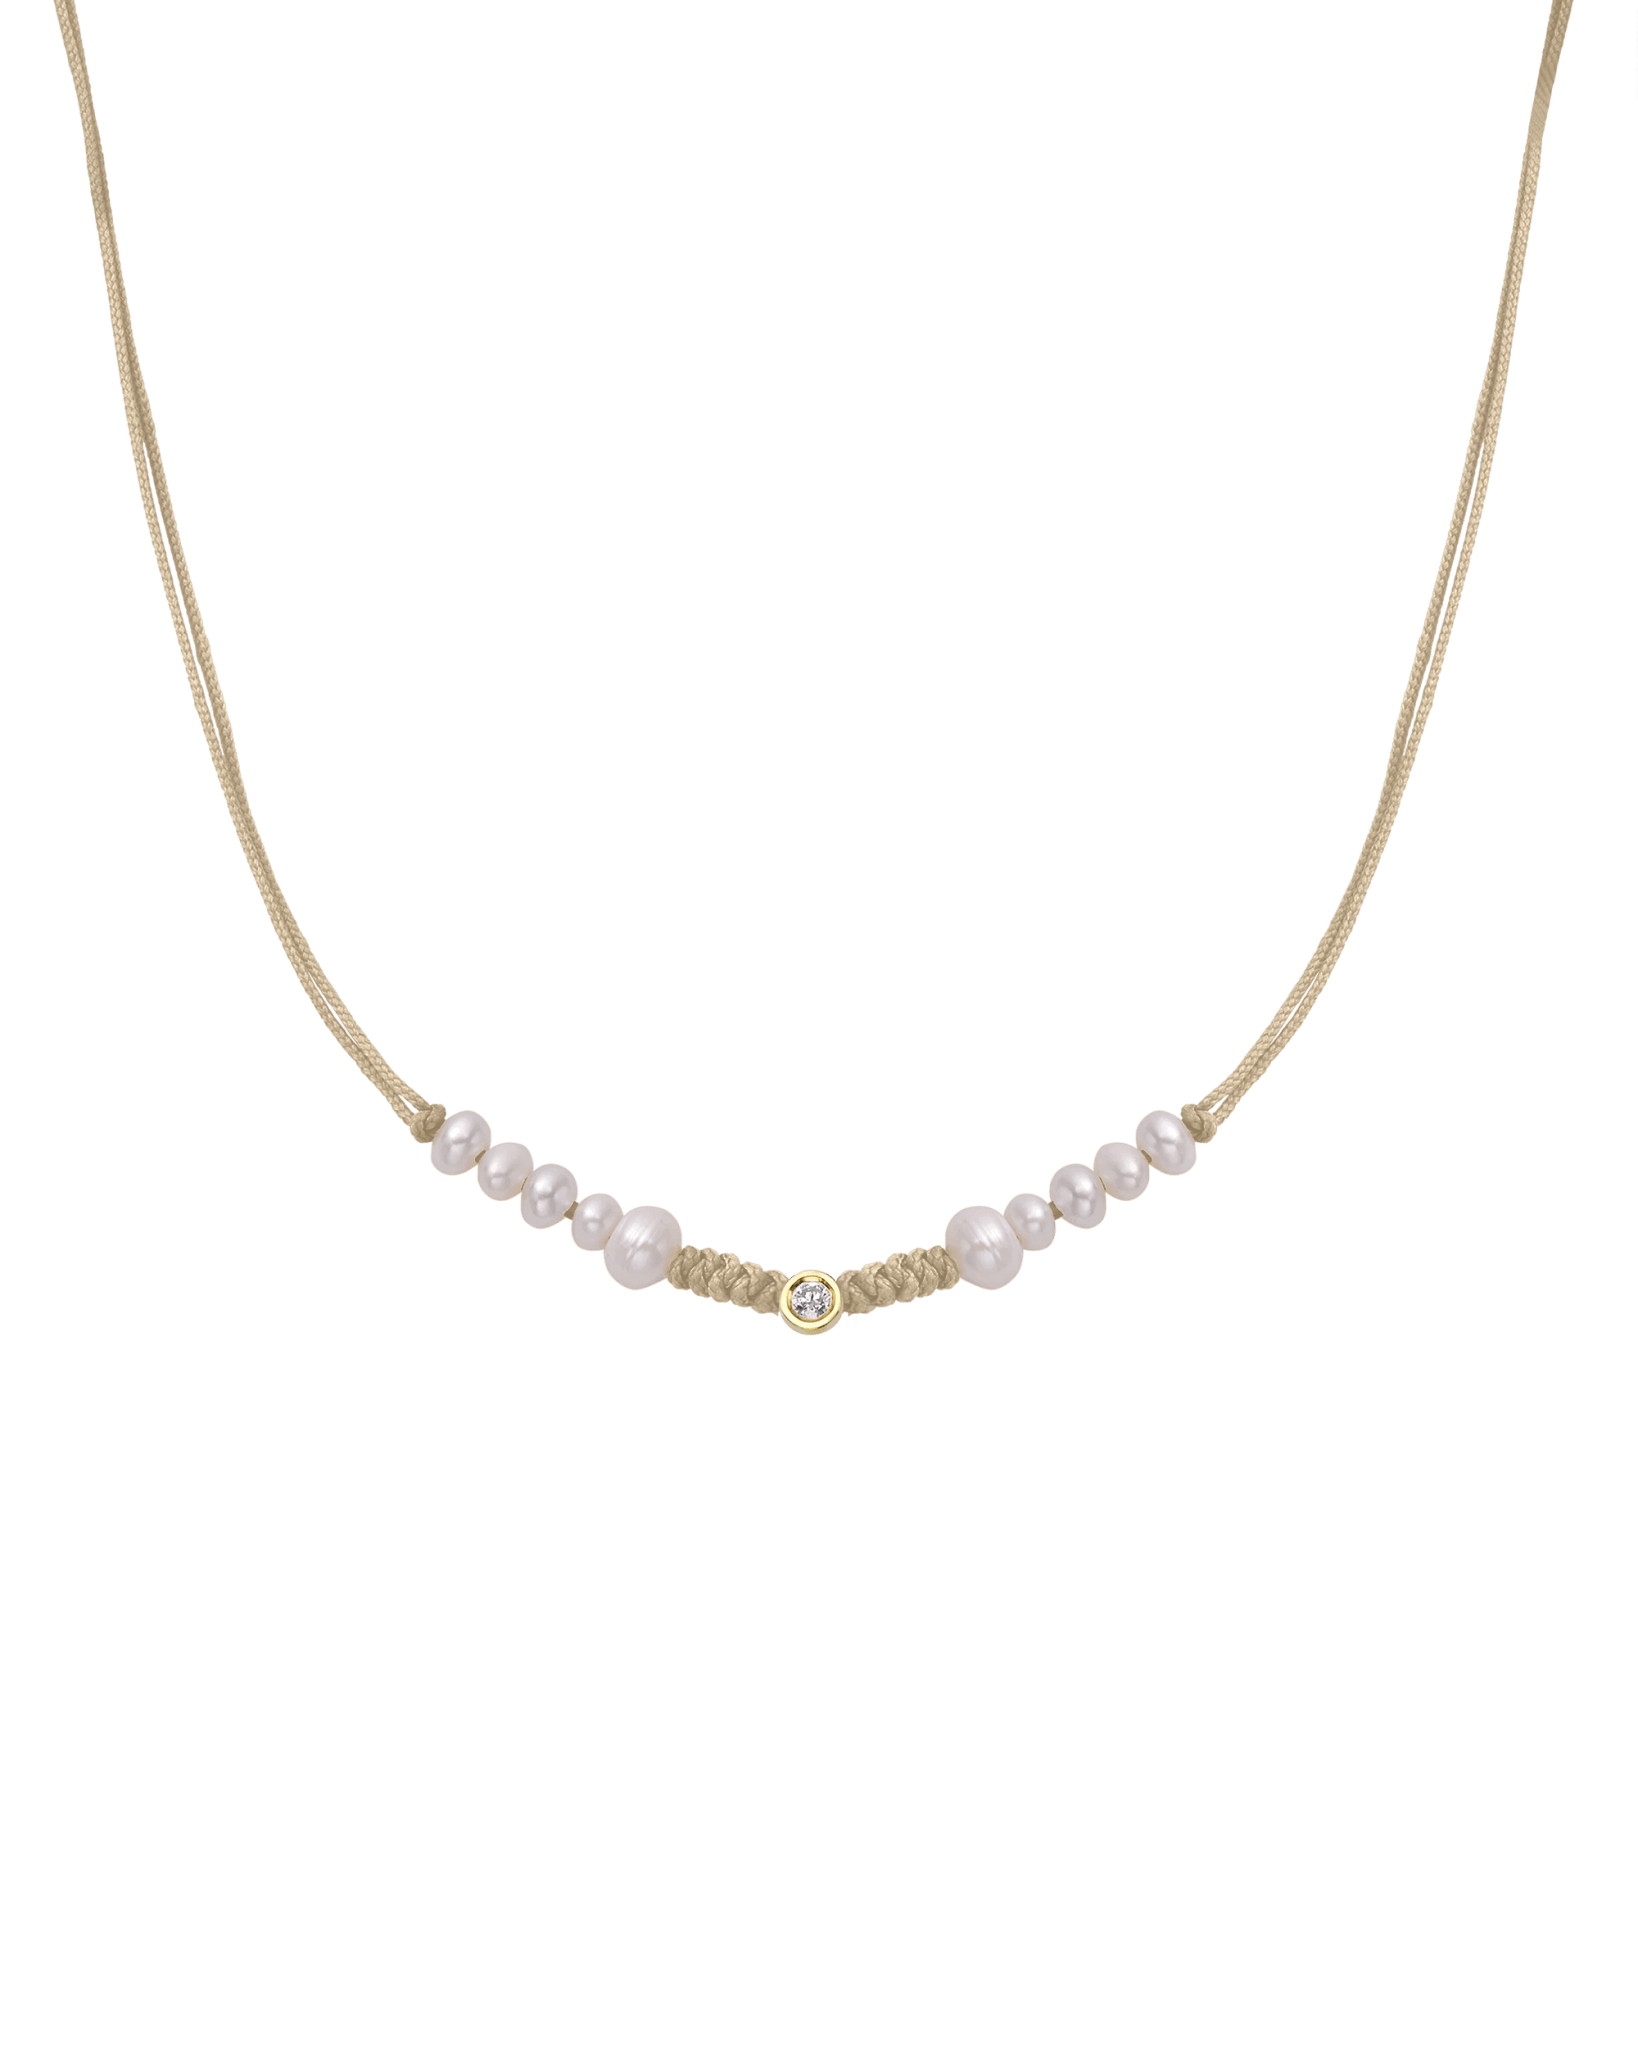 Ten Natural Pearl String of Love Necklace - 14K Yellow Gold Necklaces 14K Solid Gold Beige Medium: 0.04ct 